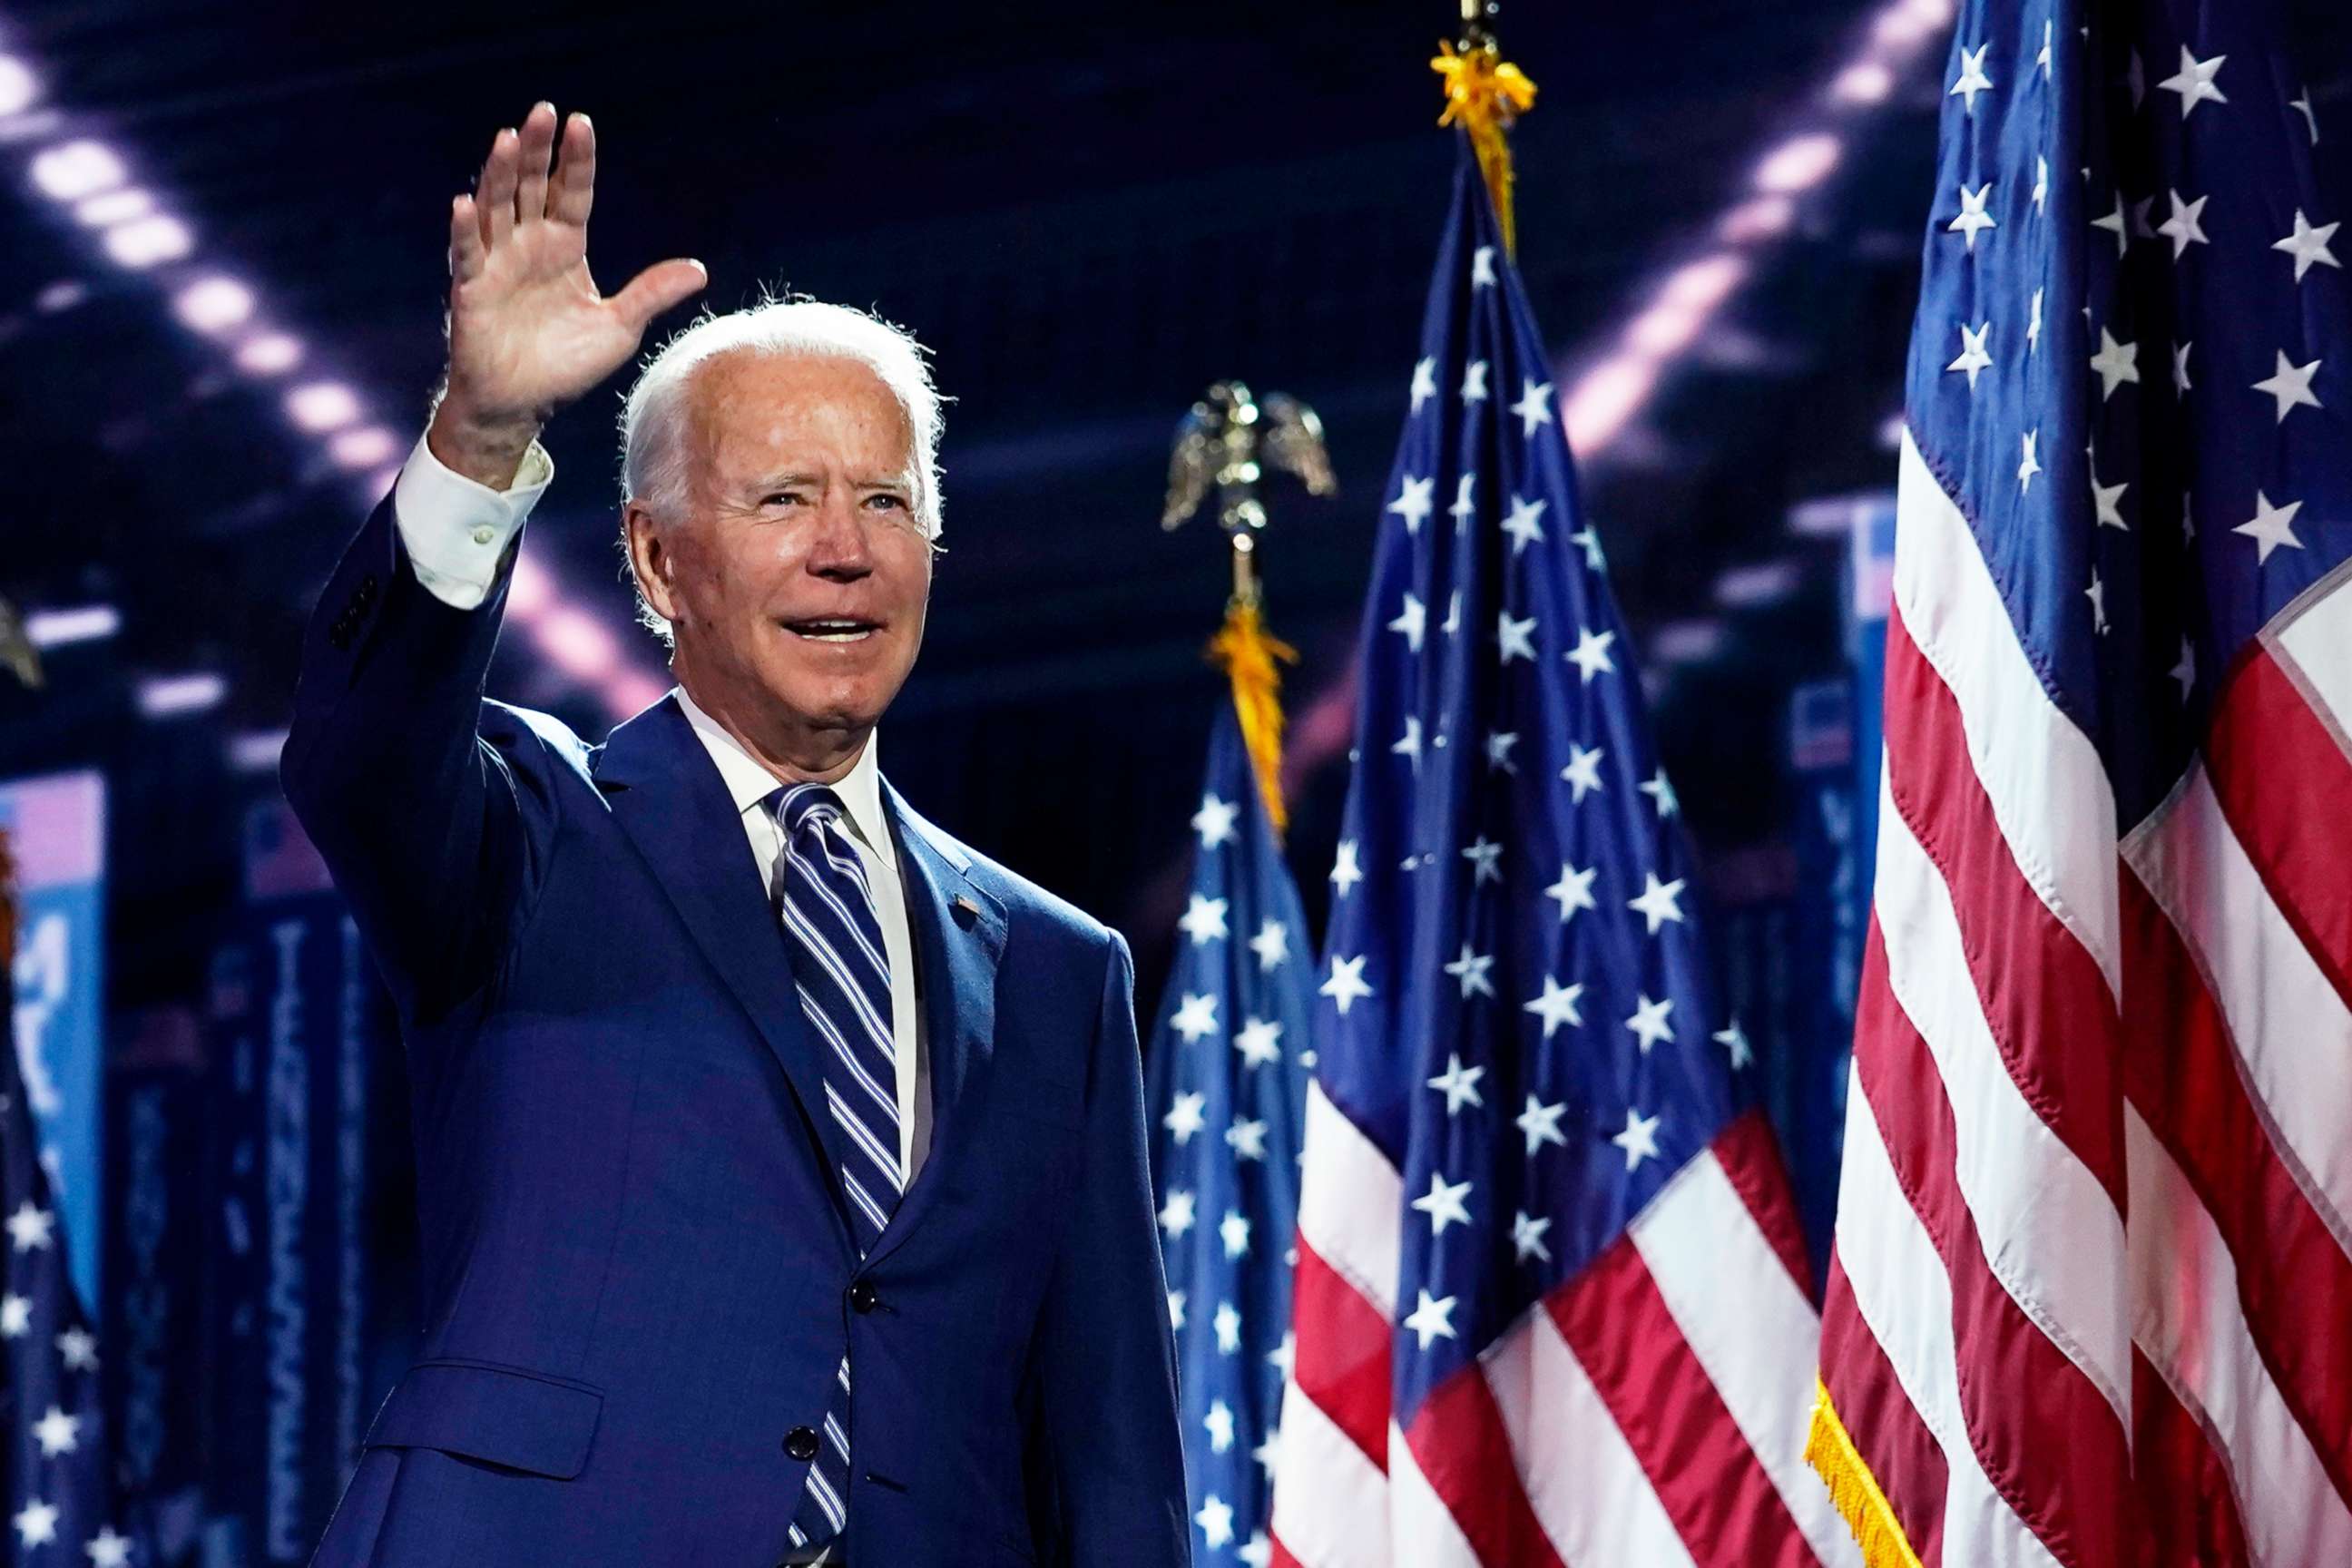 PHOTO: Democratic presidential candidate former Vice President Joe Biden arrives on stage after Democratic vice presidential candidate Sen. Kamala Harris accepted the nomination during the Democratic National Convention, Aug. 19, 2020, in Wilmington, Del.